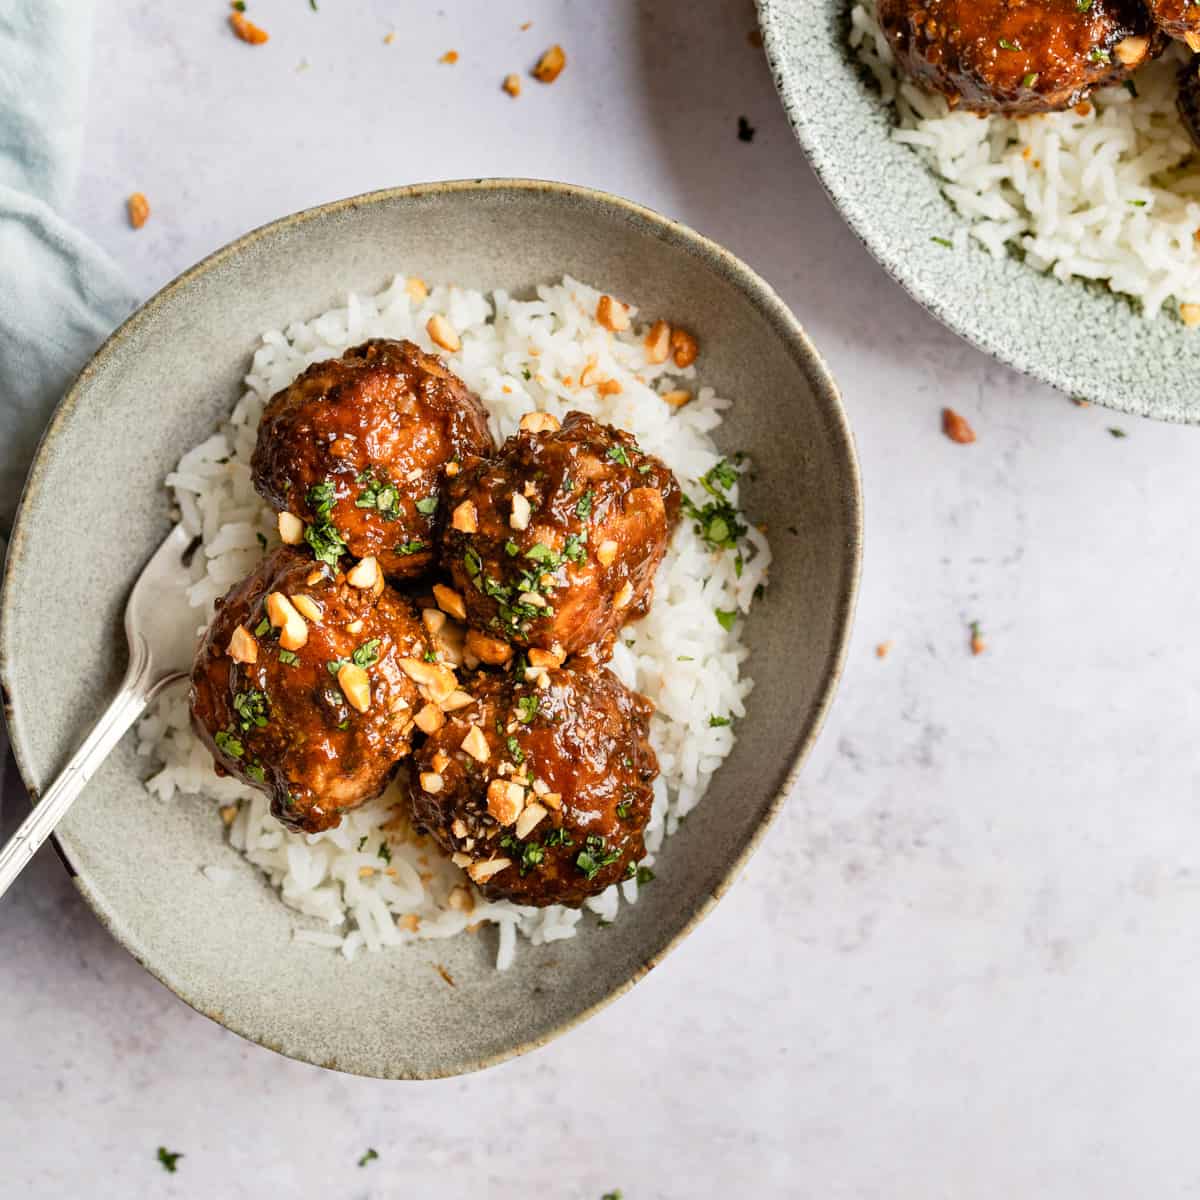 Asian pork meatballs on rice in a white bowl.